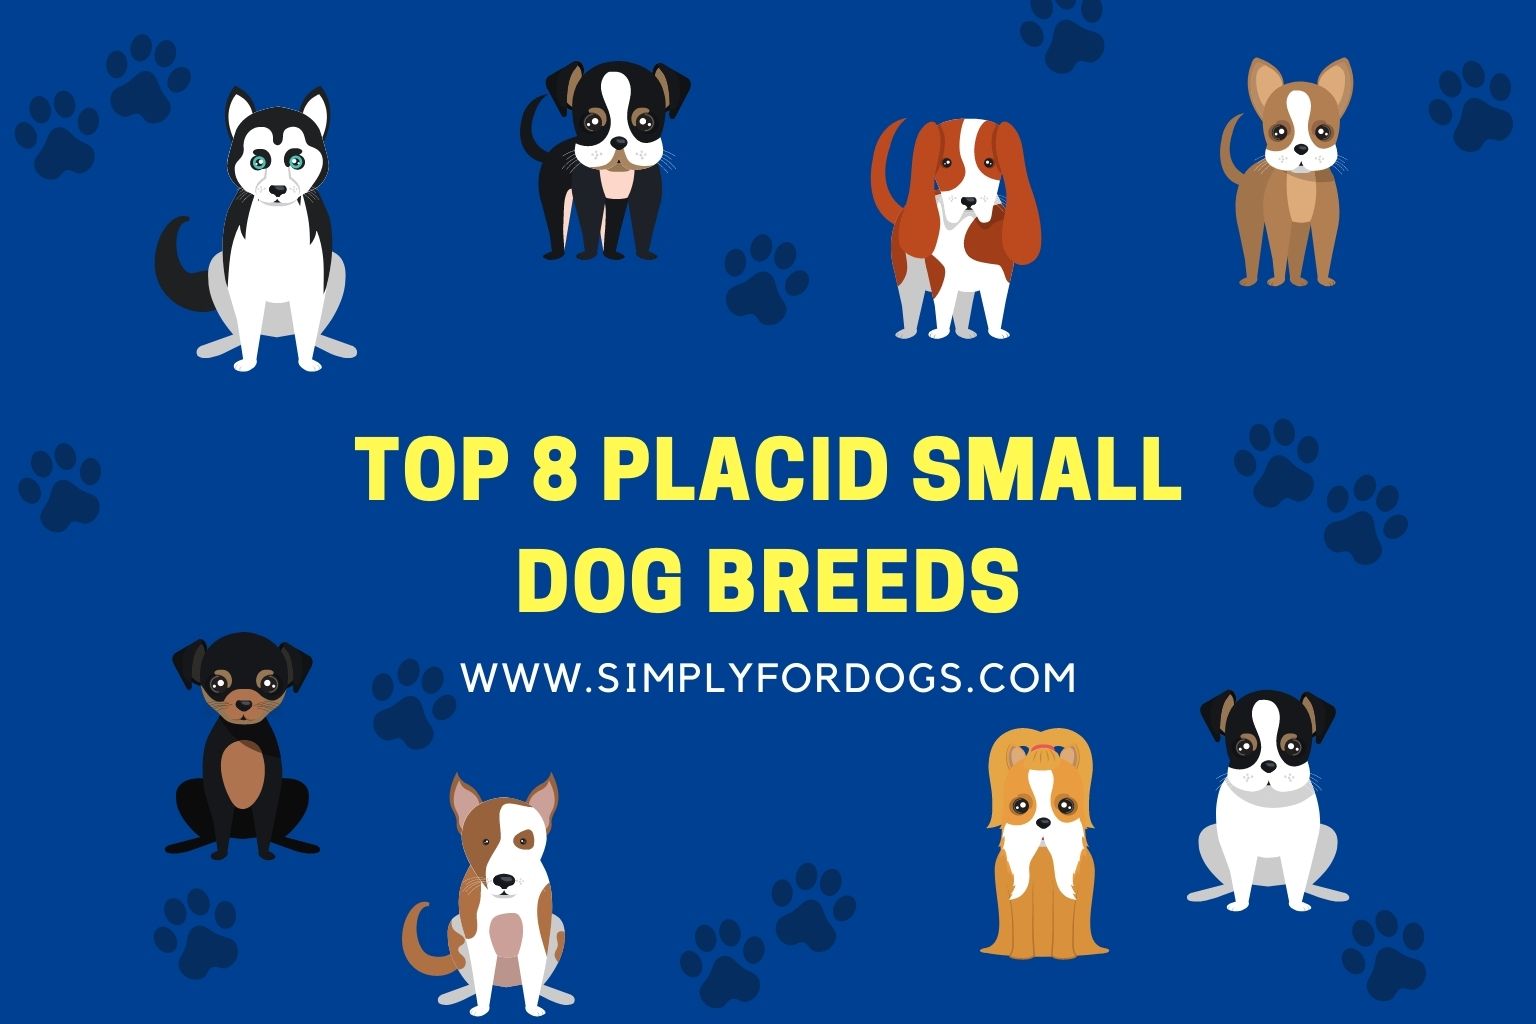 Top 8 Placid Small Dog Breeds